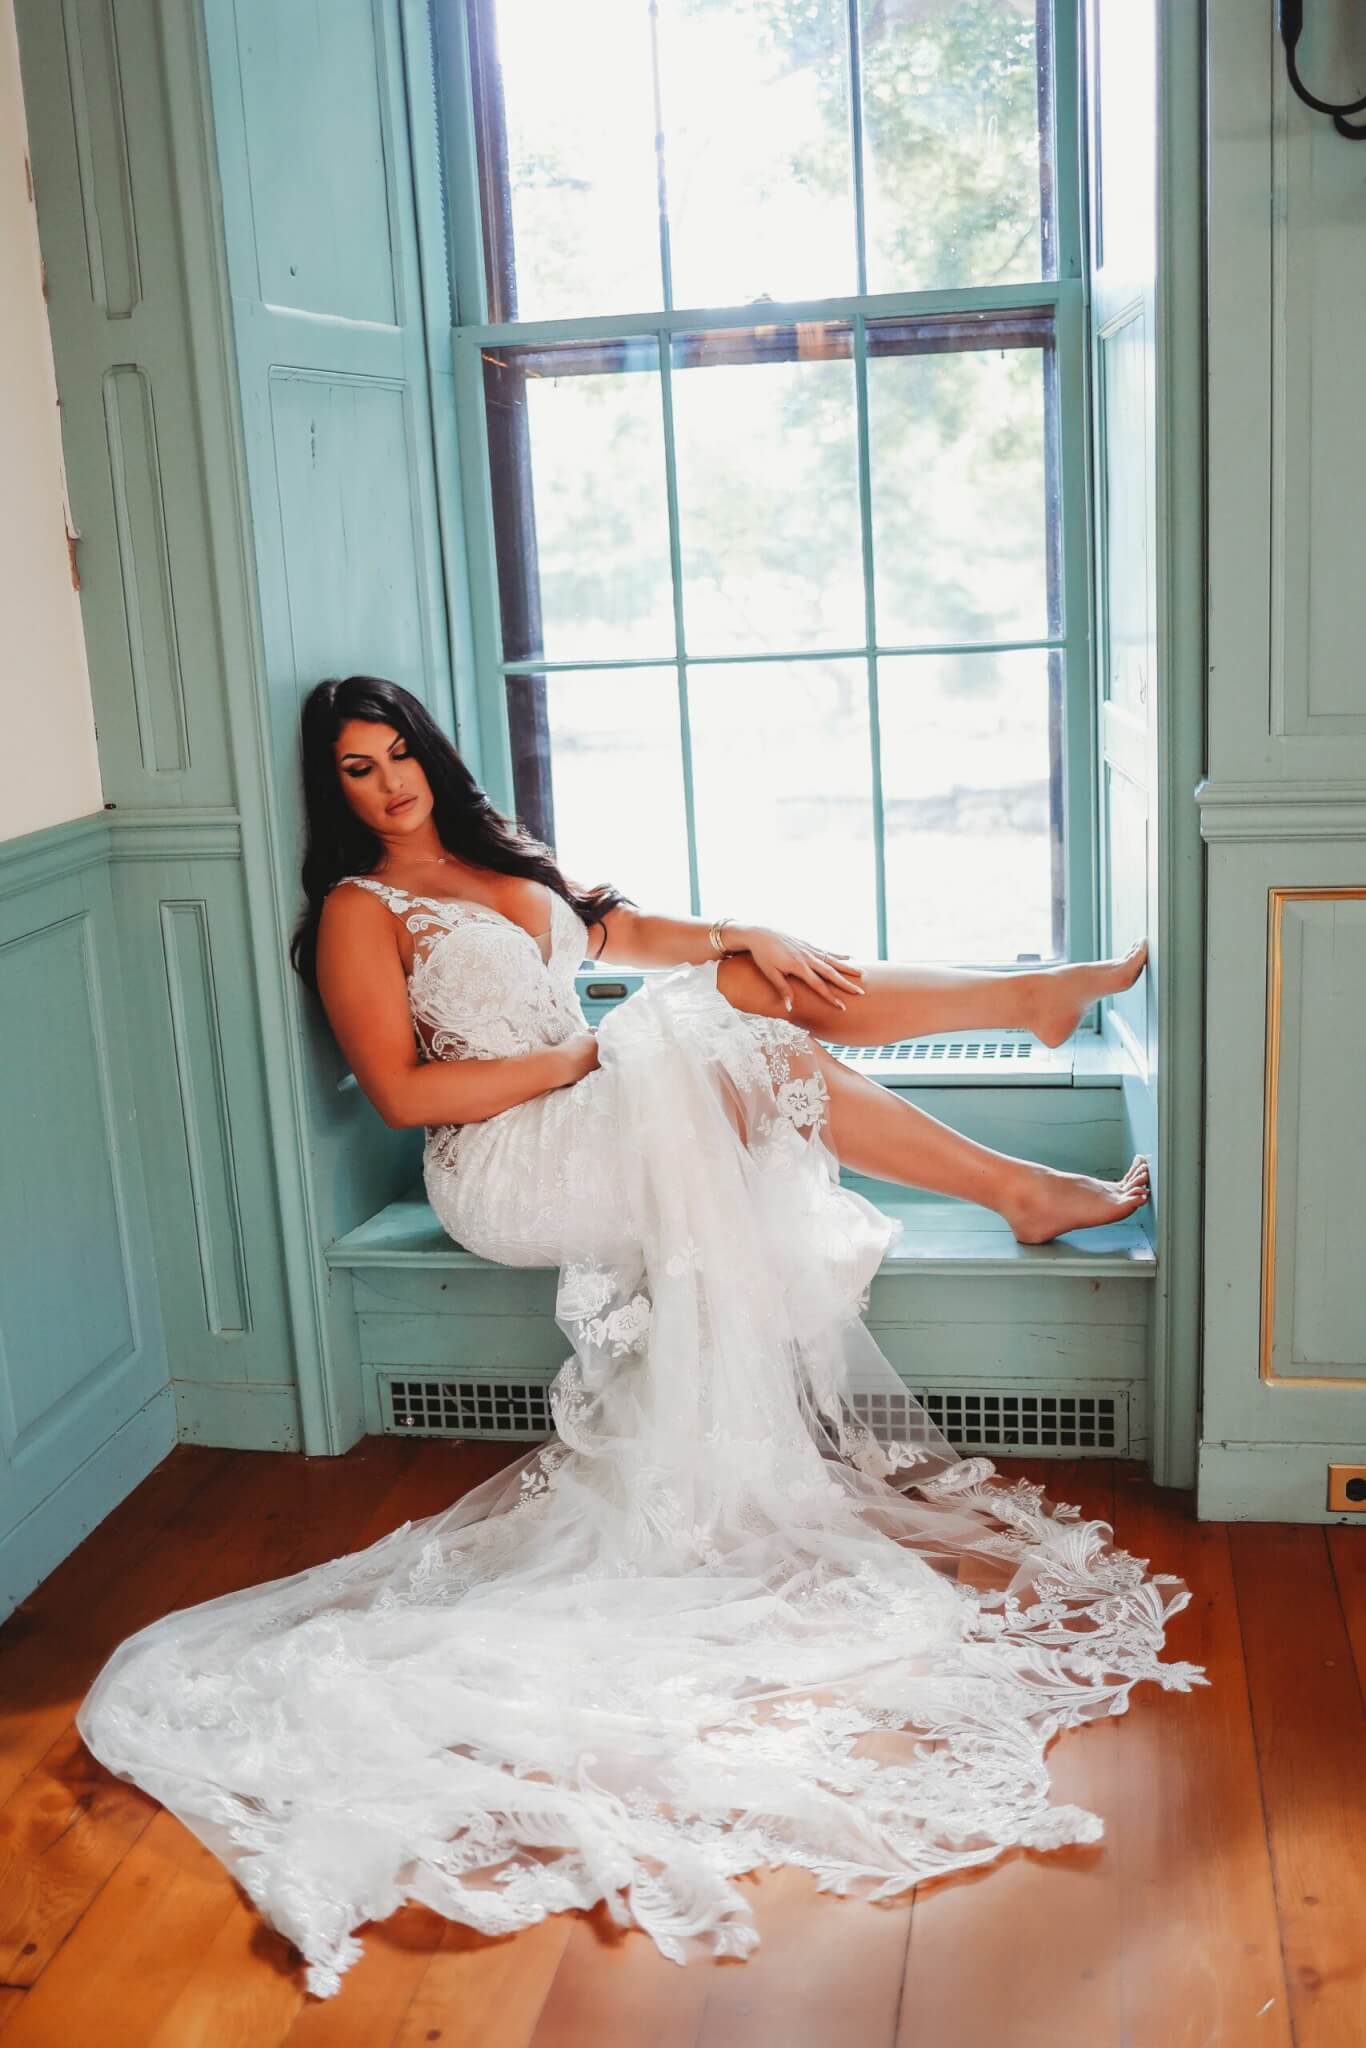 “The Possibilities Are Endless Here:” A Look Inside Alli Murphy Photography’s Boudoir Manor